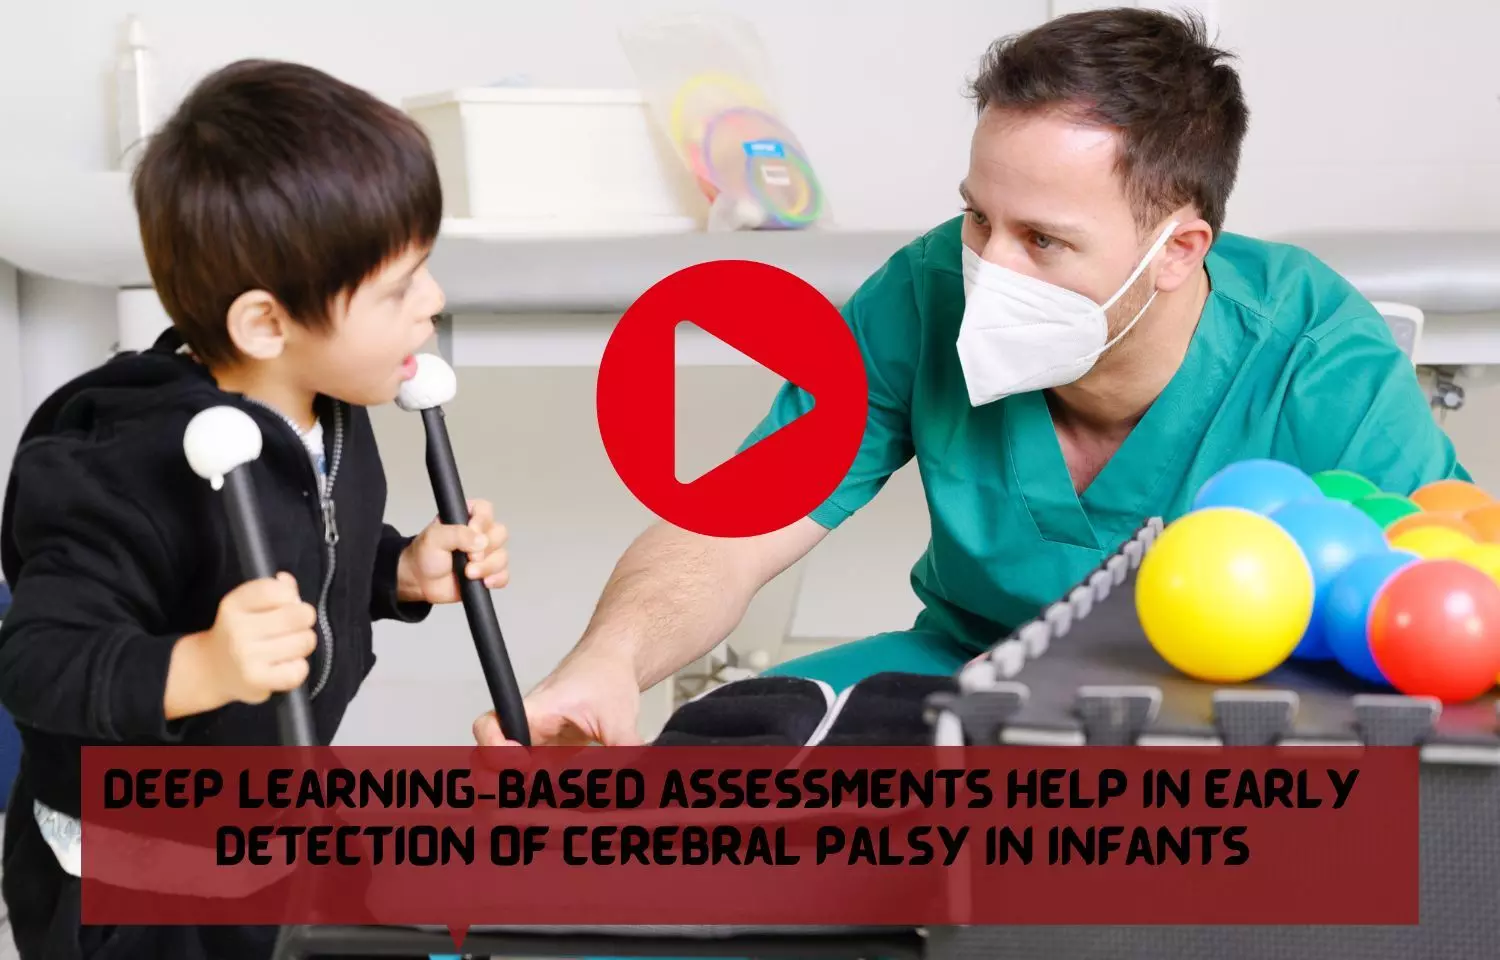 Deep learning-based assessments help in early detection of Cerebral Palsy in infants